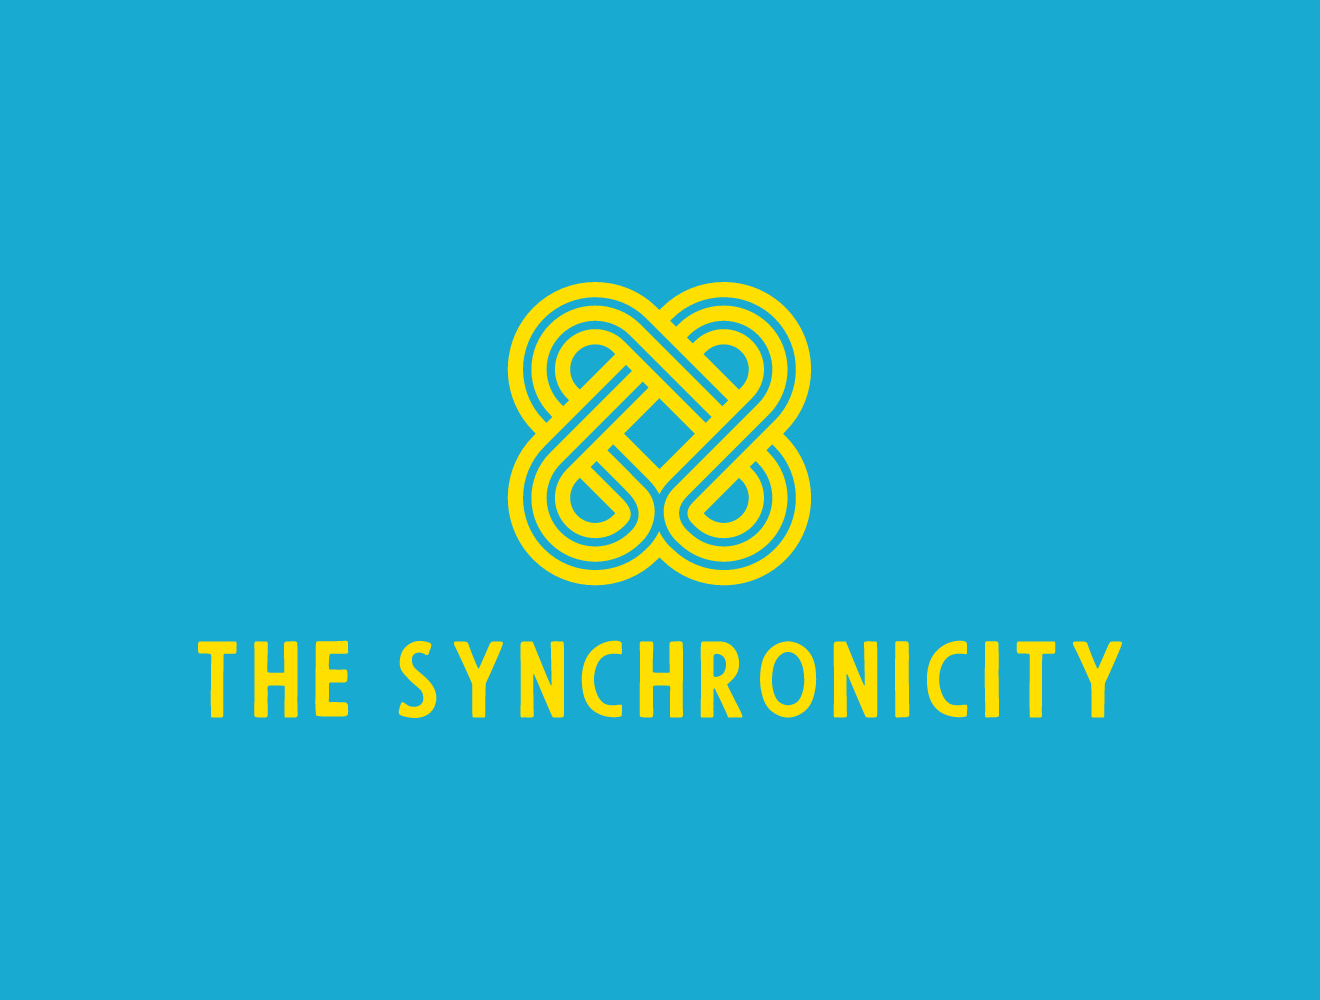 The Synchronicity